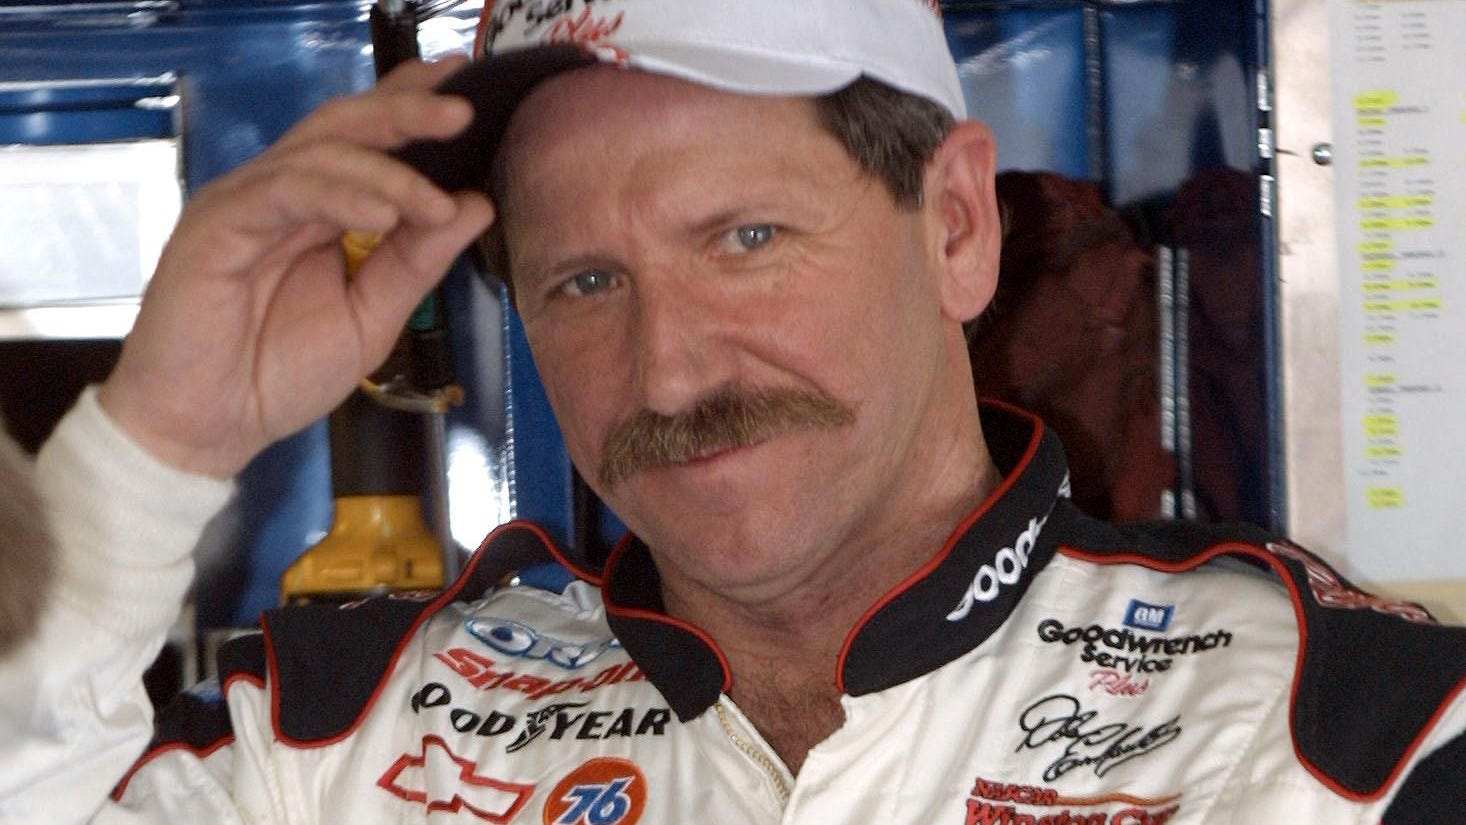 Years ago, Dale Earnhardt broke that same hand defending his property. 